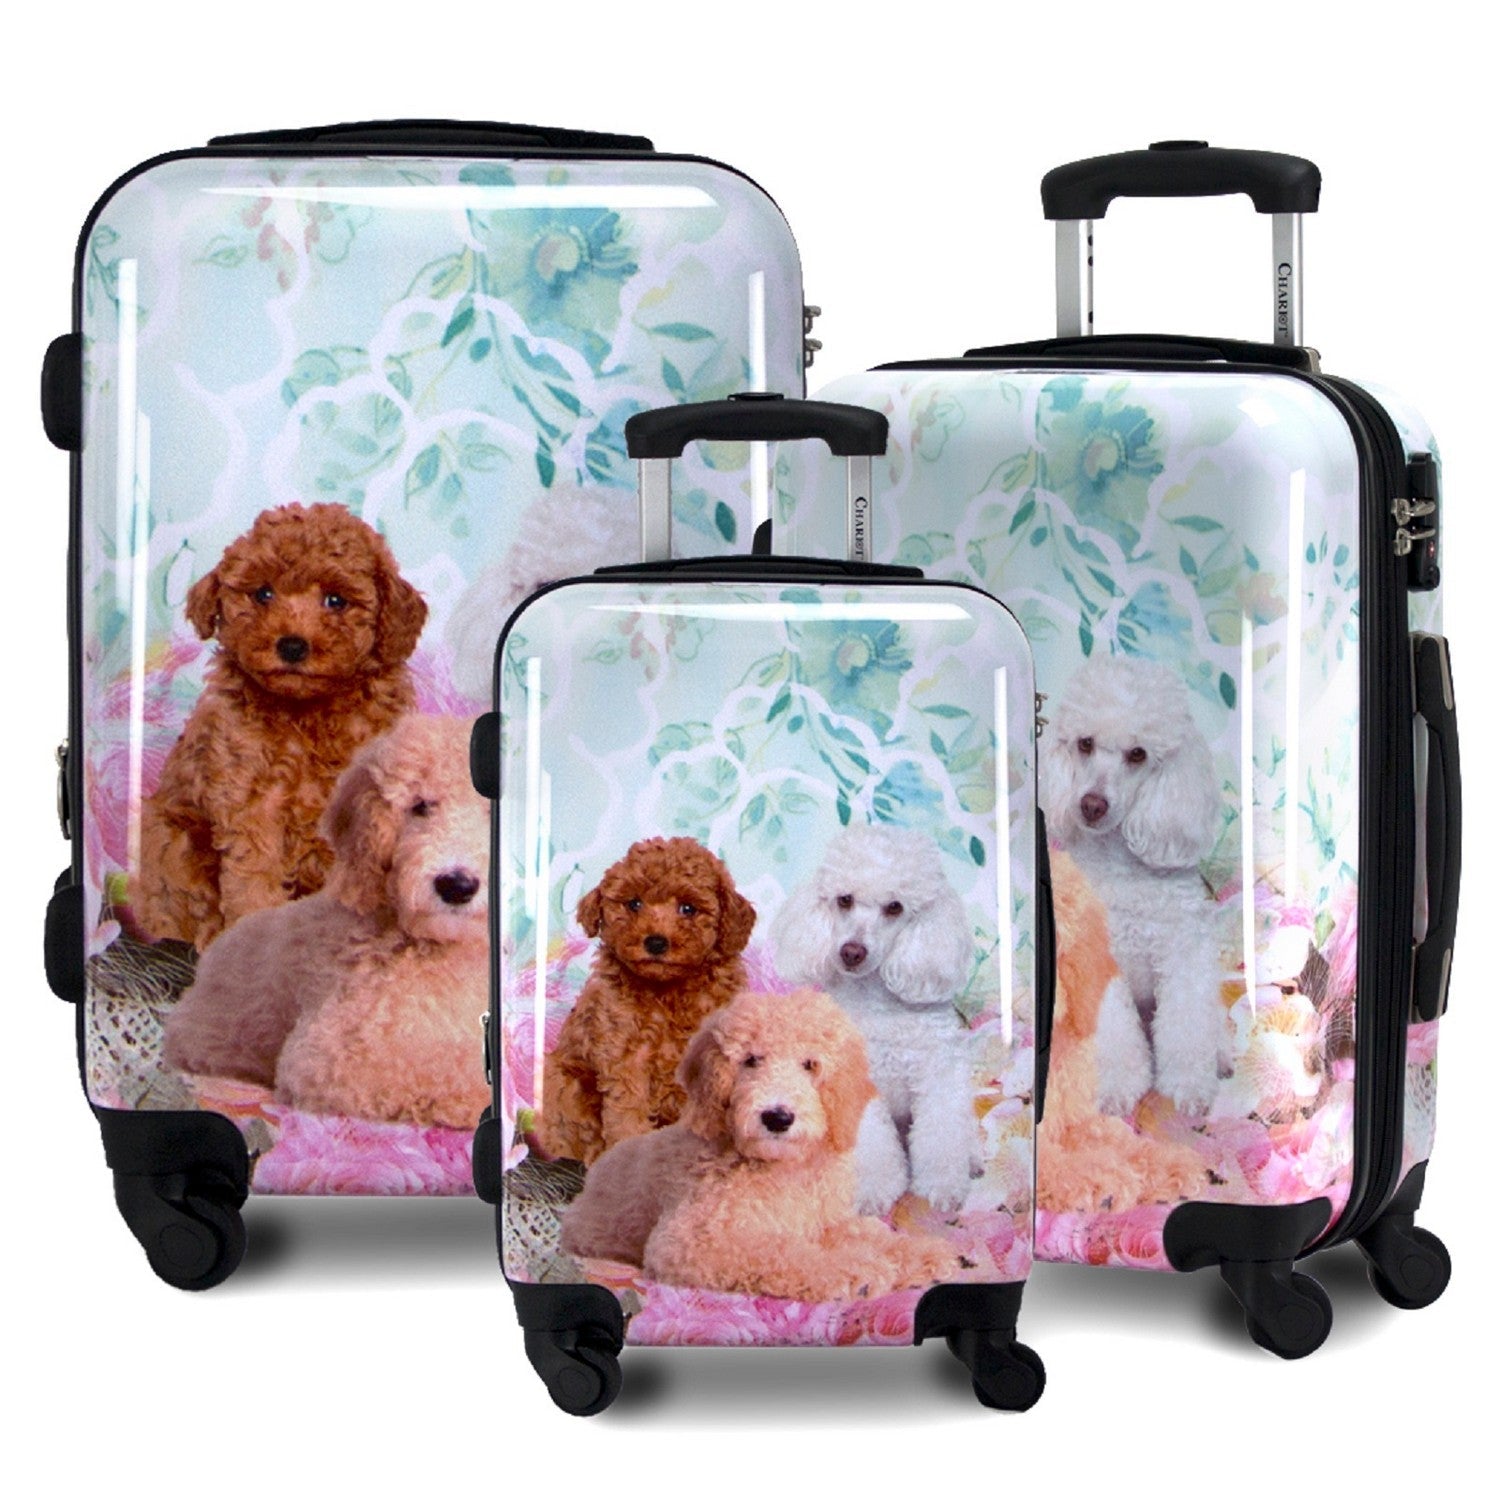 Chariot Printed 3-Piece Expandable Hardside Spinner Luggage Set - Garden Poodle